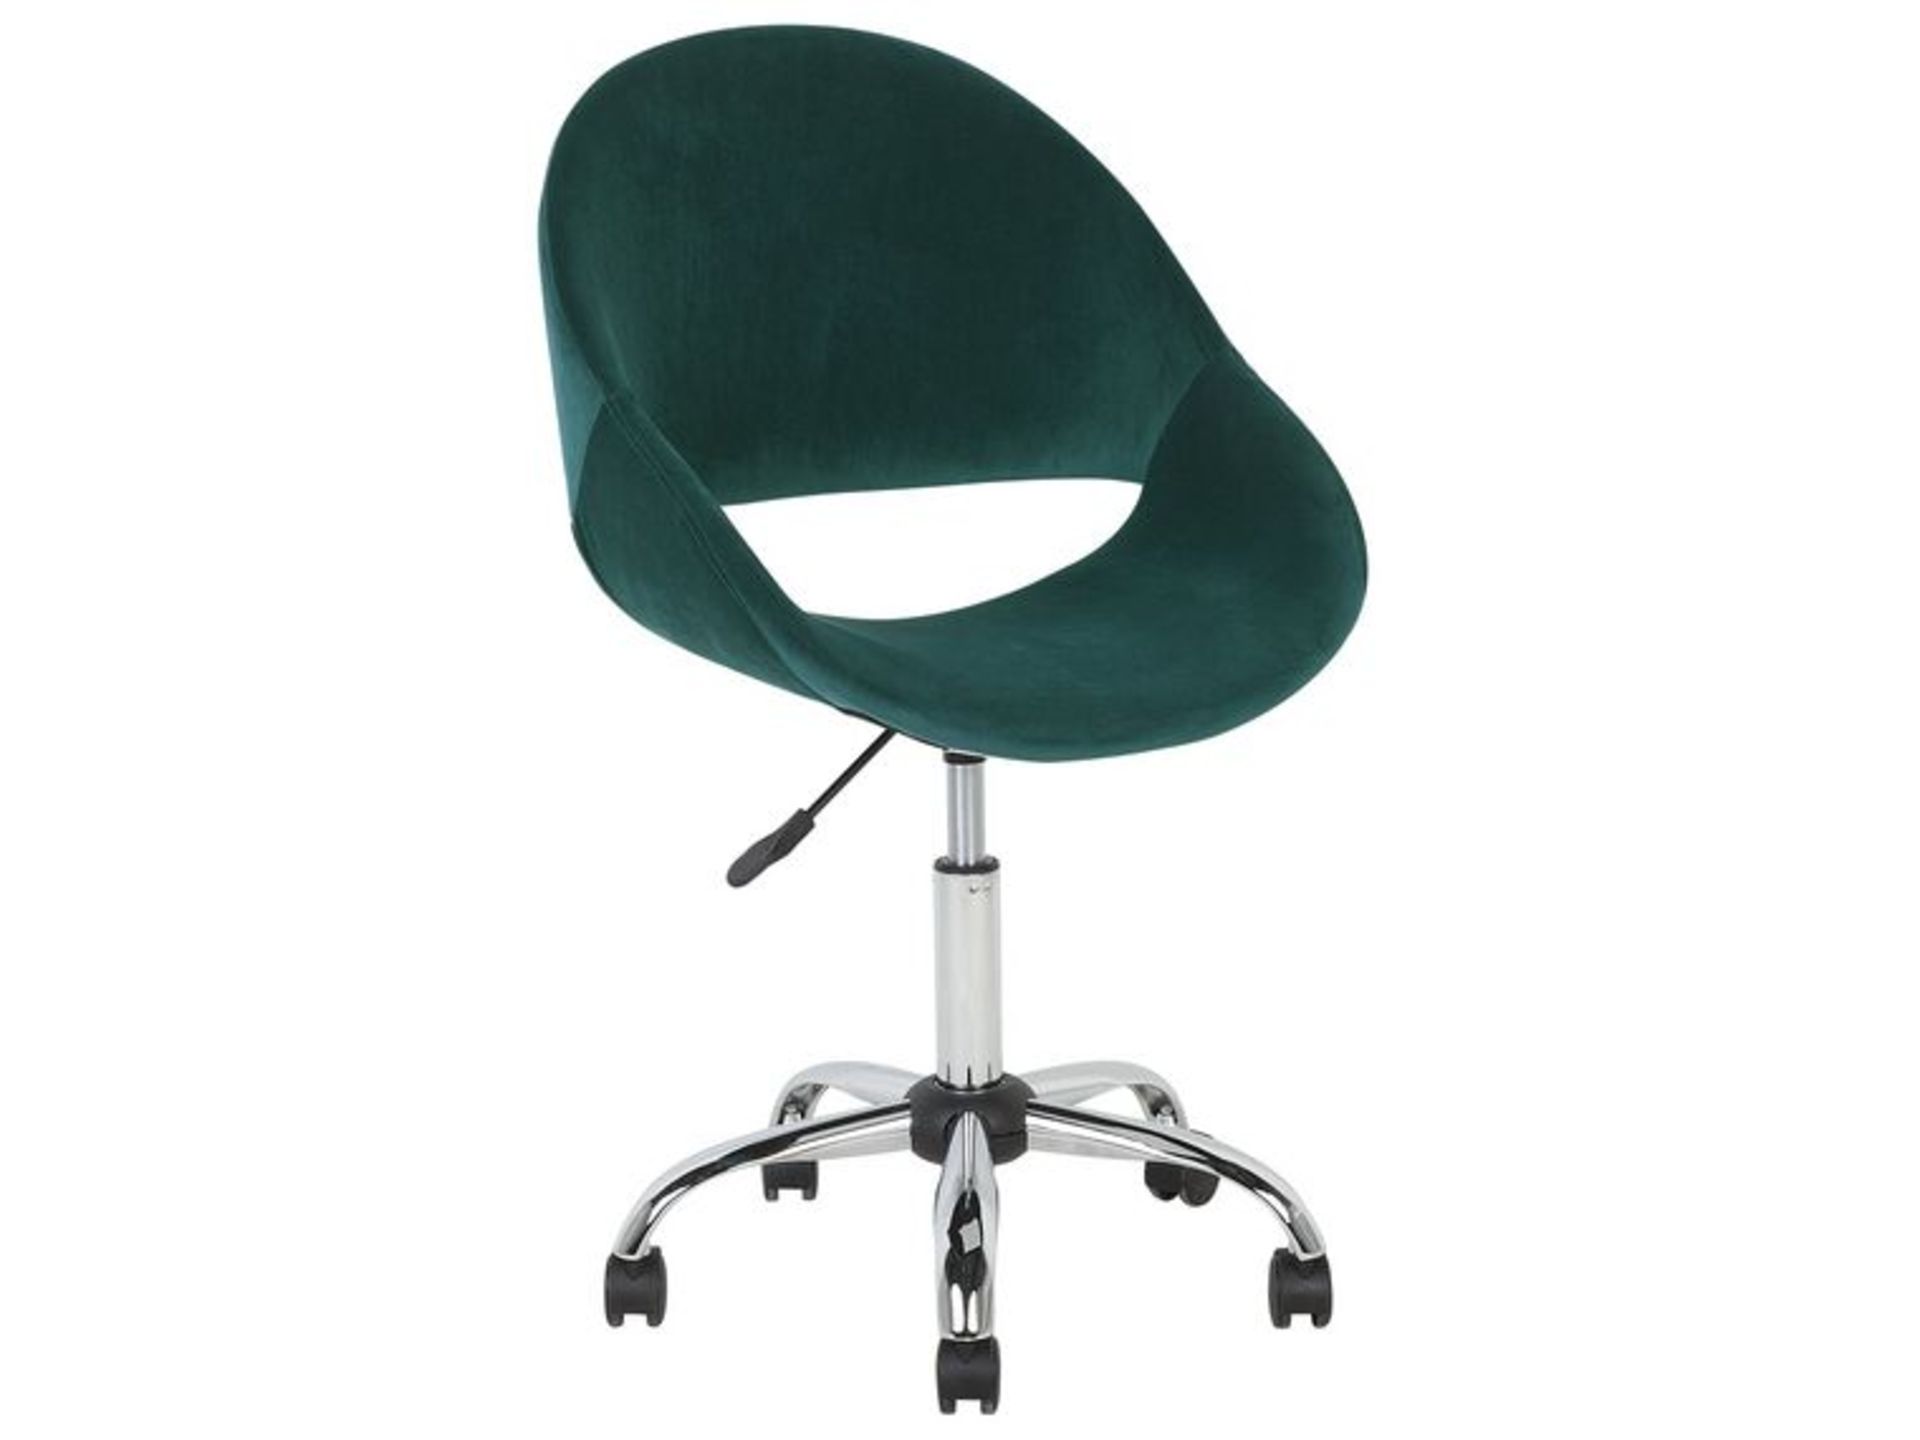 Selma Velvet Armless Desk Chair Green. - SR6. RRP £189.99. Upgrade your home office with this